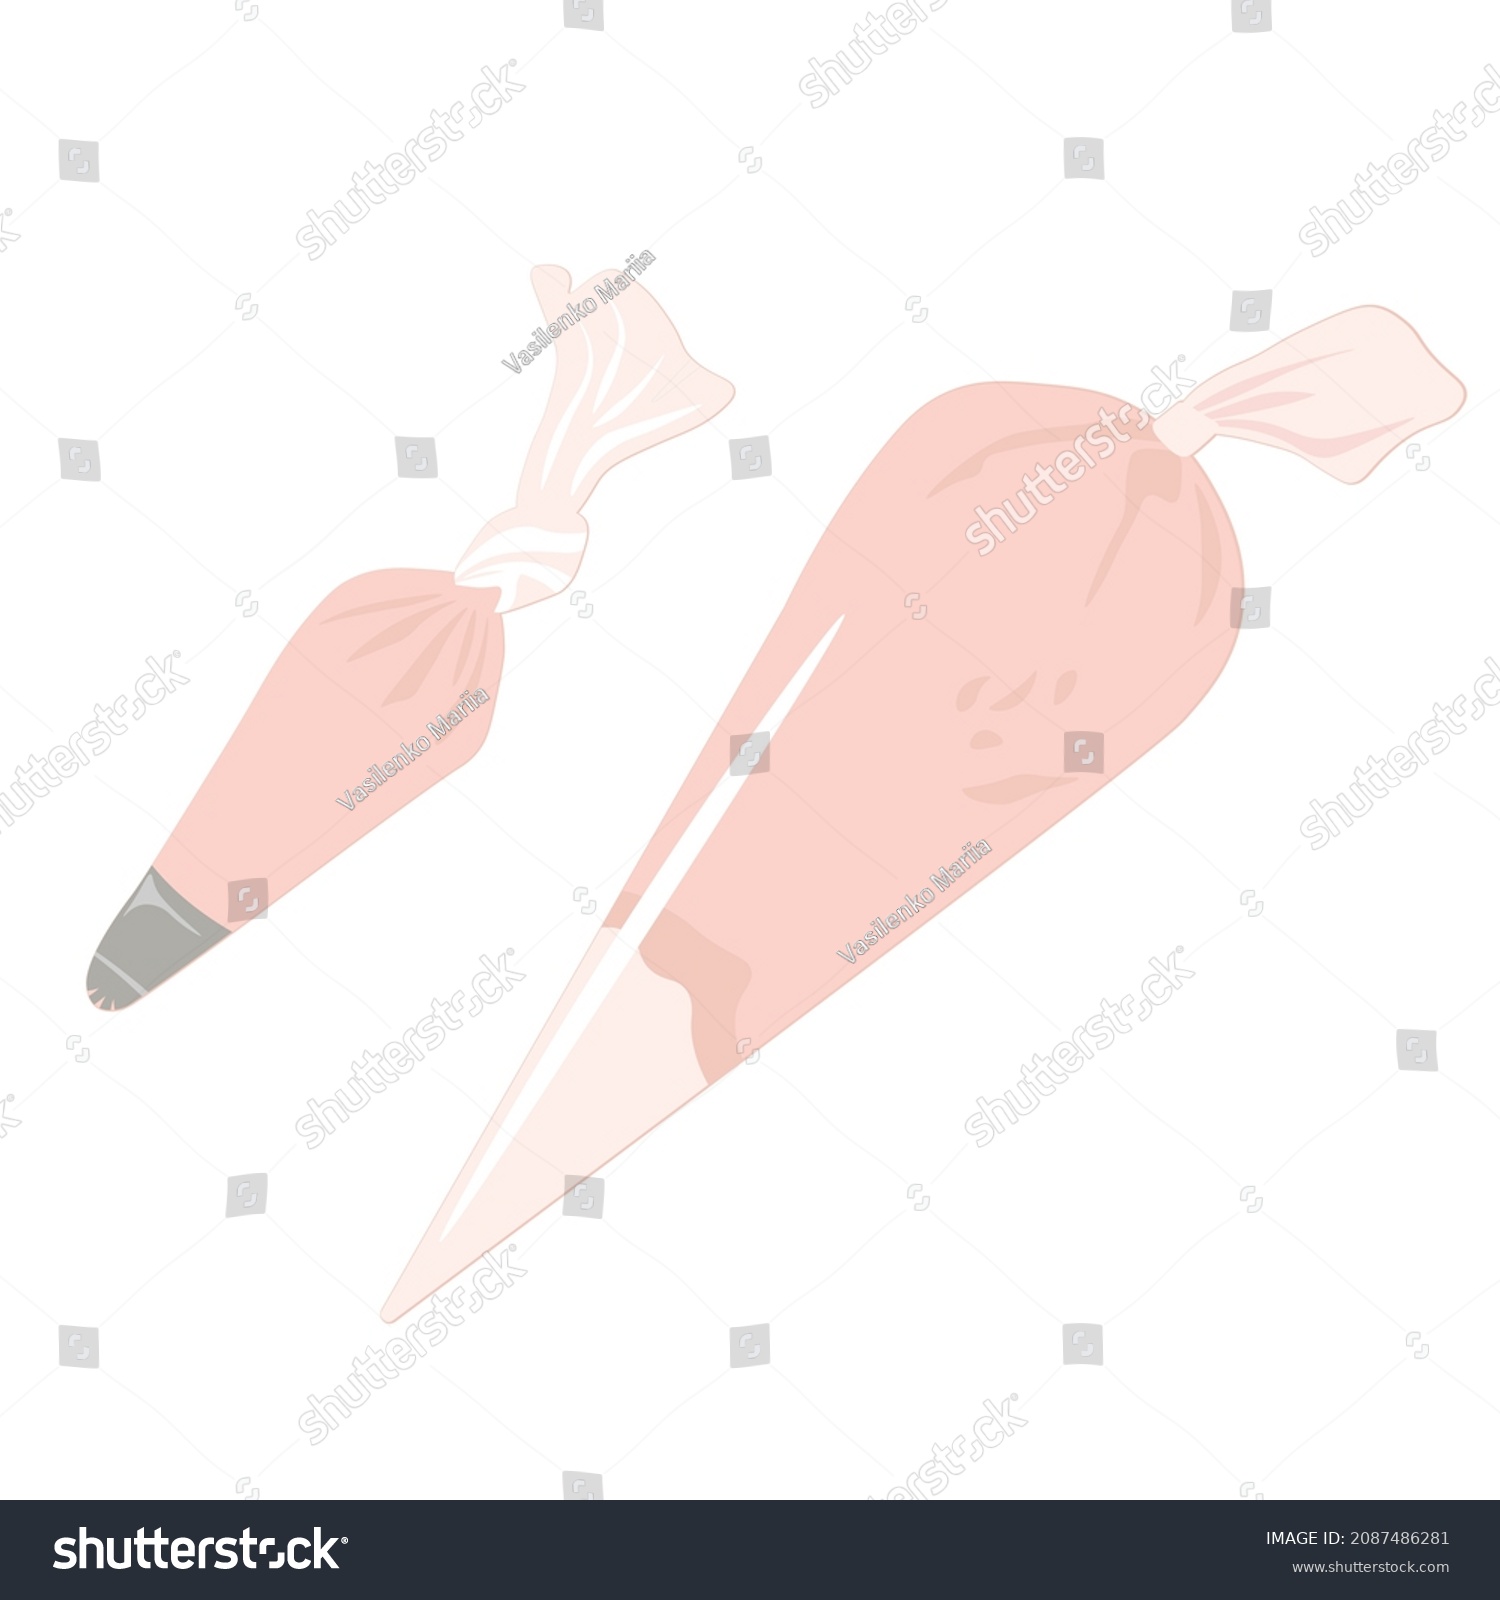 SVG of Pastry sleeve vector stock illustration. Tableware for the bakery. A tool for cream. Isolated on a white background. svg